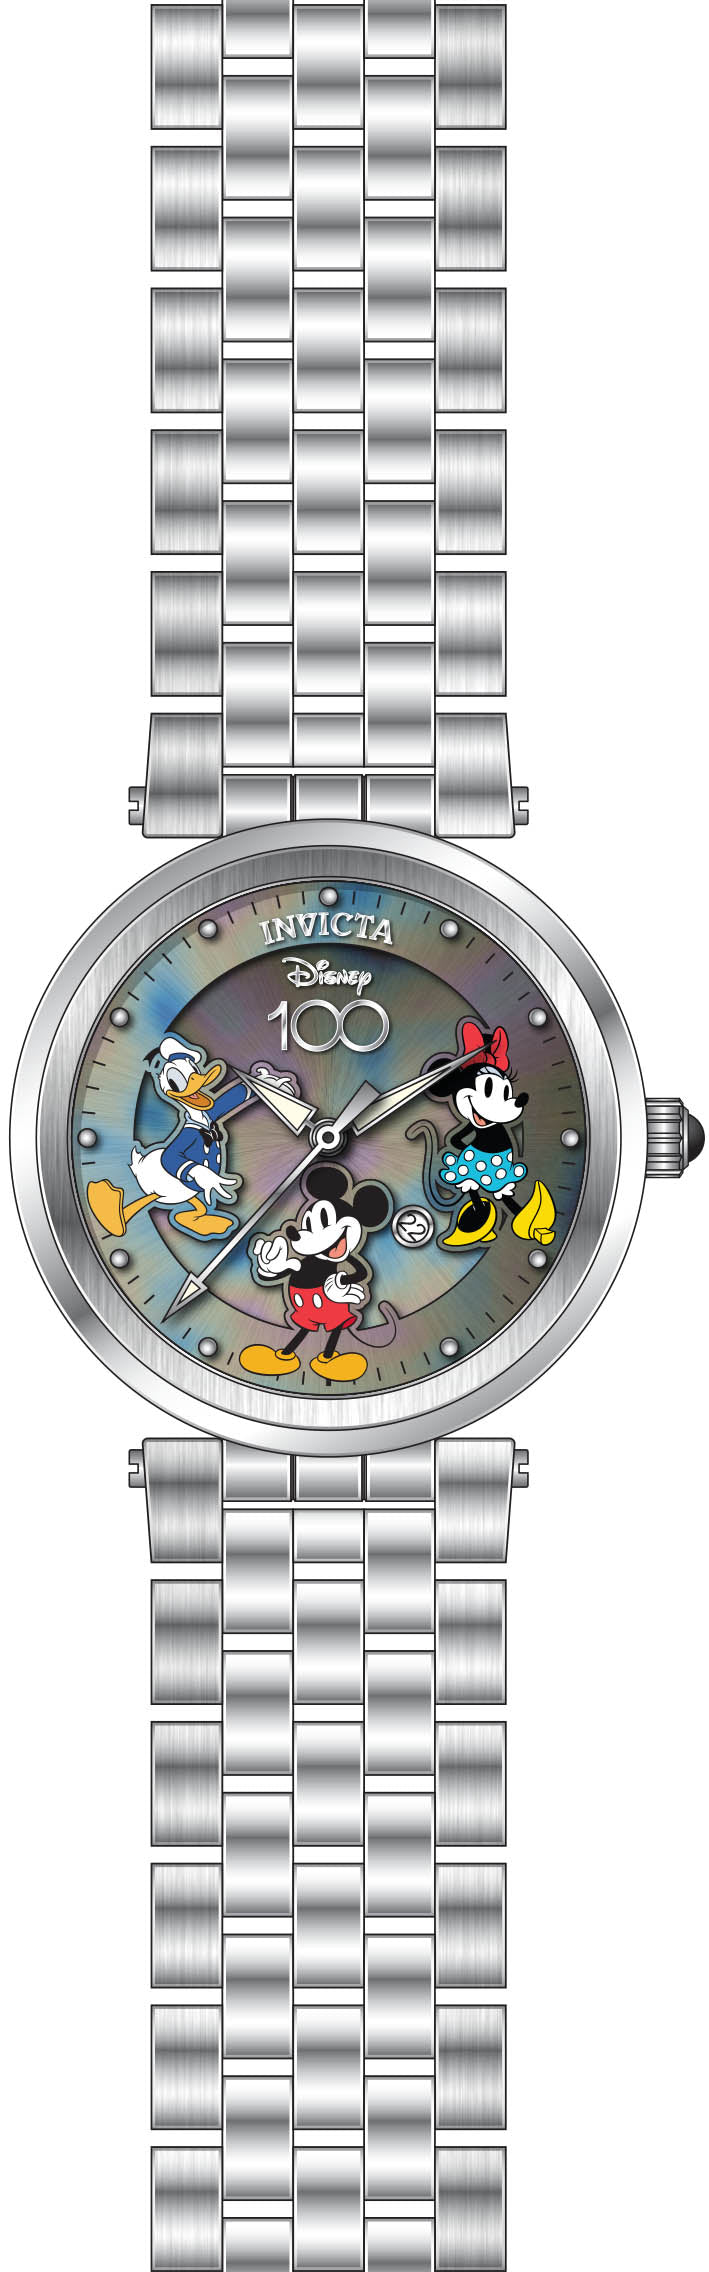 Band For Invicta Disney Limited Edition  Lady 44742